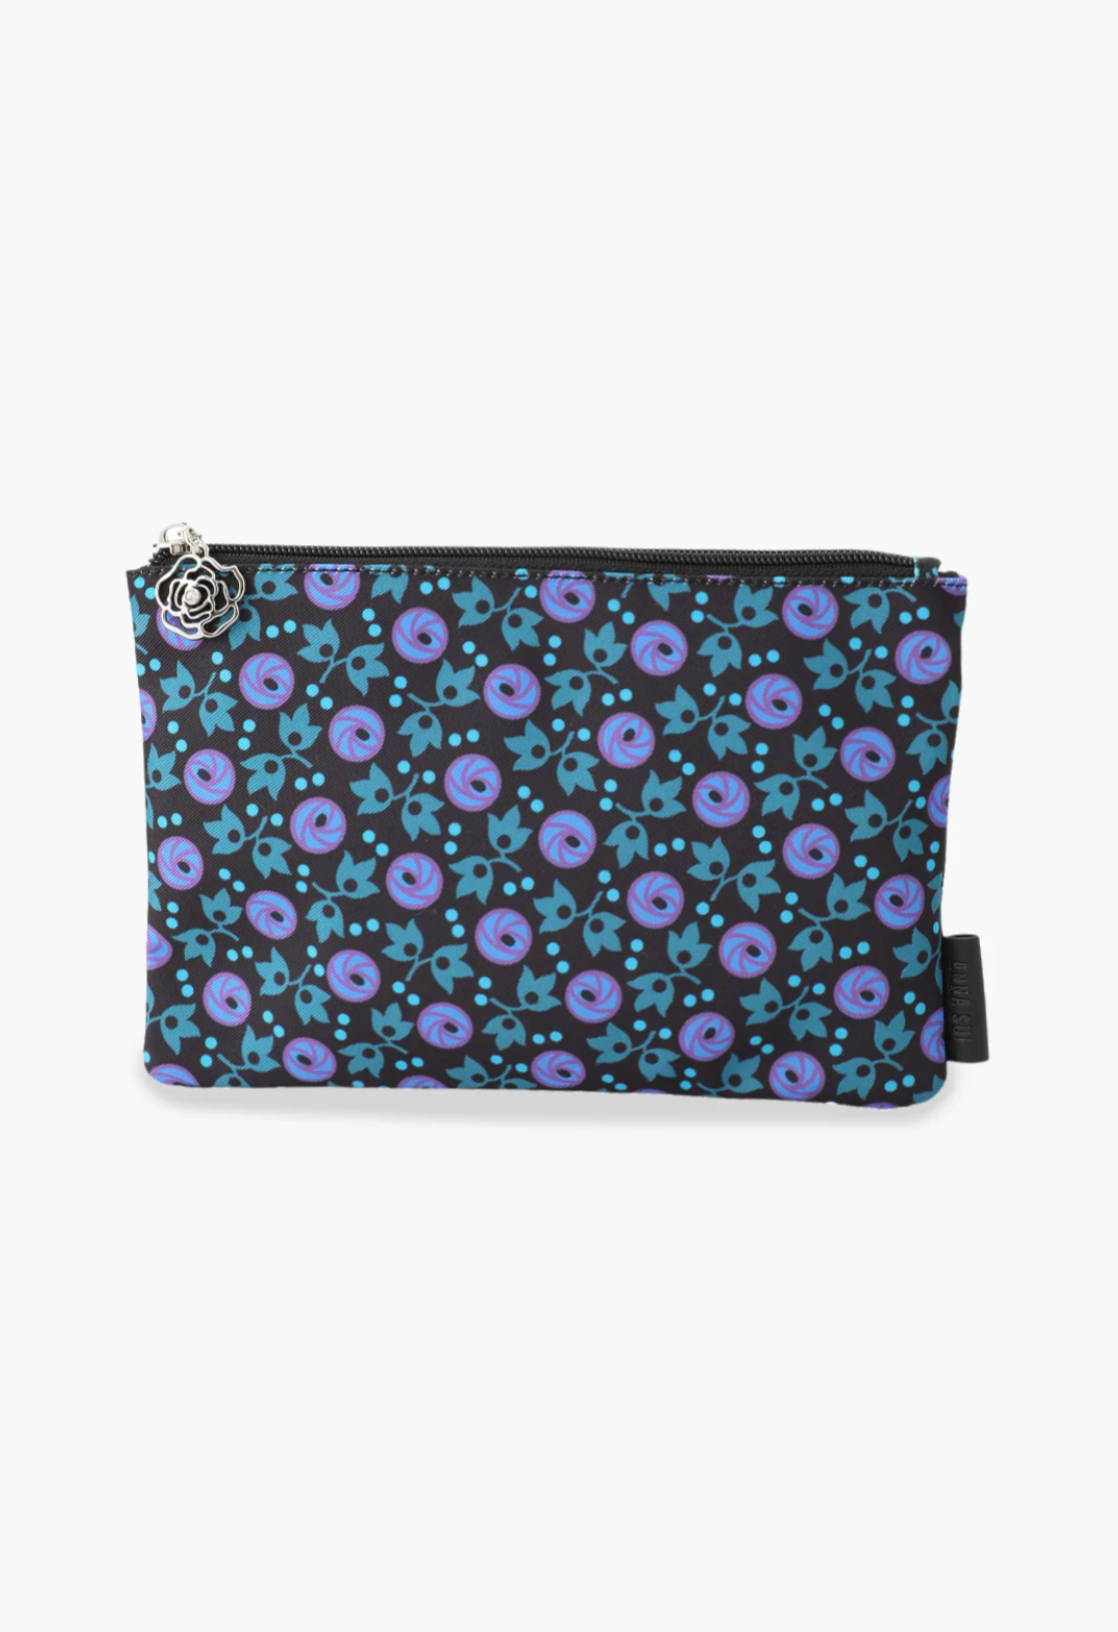 A purse like with floral blueish design, zipper rose with a gemstone pull tab